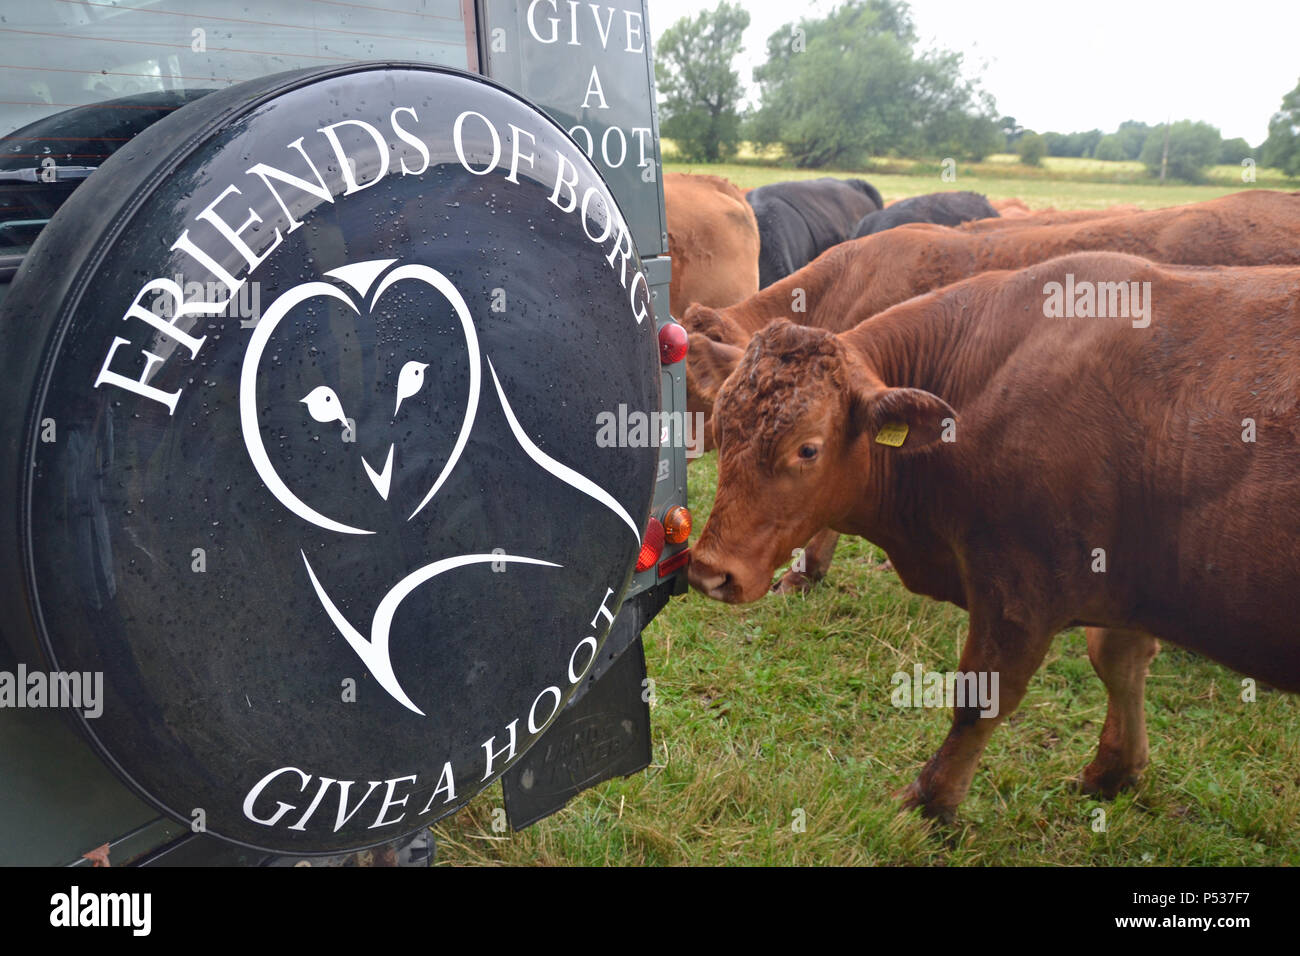 Curious cows sniffing a landrover belonging to the Bucks Owl and Raptor Group, Buckinghamshire, UK Stock Photo